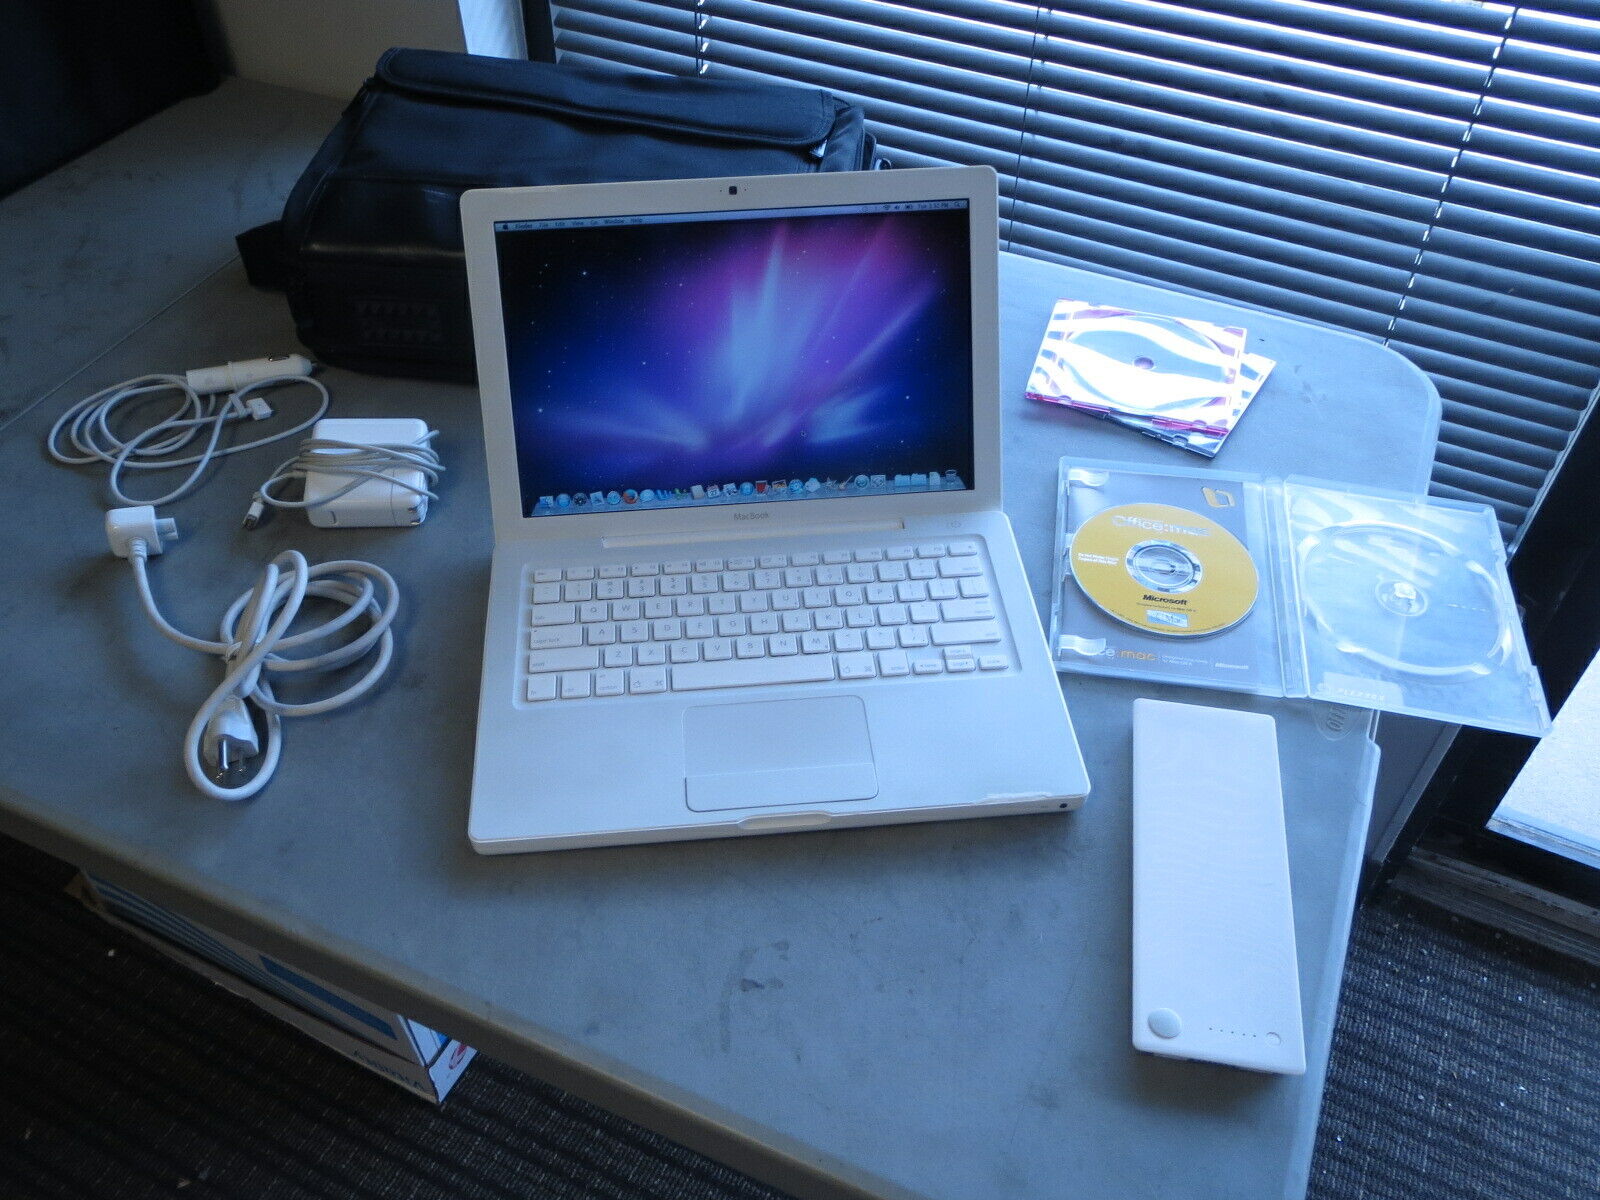 MacBook 2,1 A1181,Snow Leopard, 128GB SSD Drive, 4GB Memory, Extra Battery, case